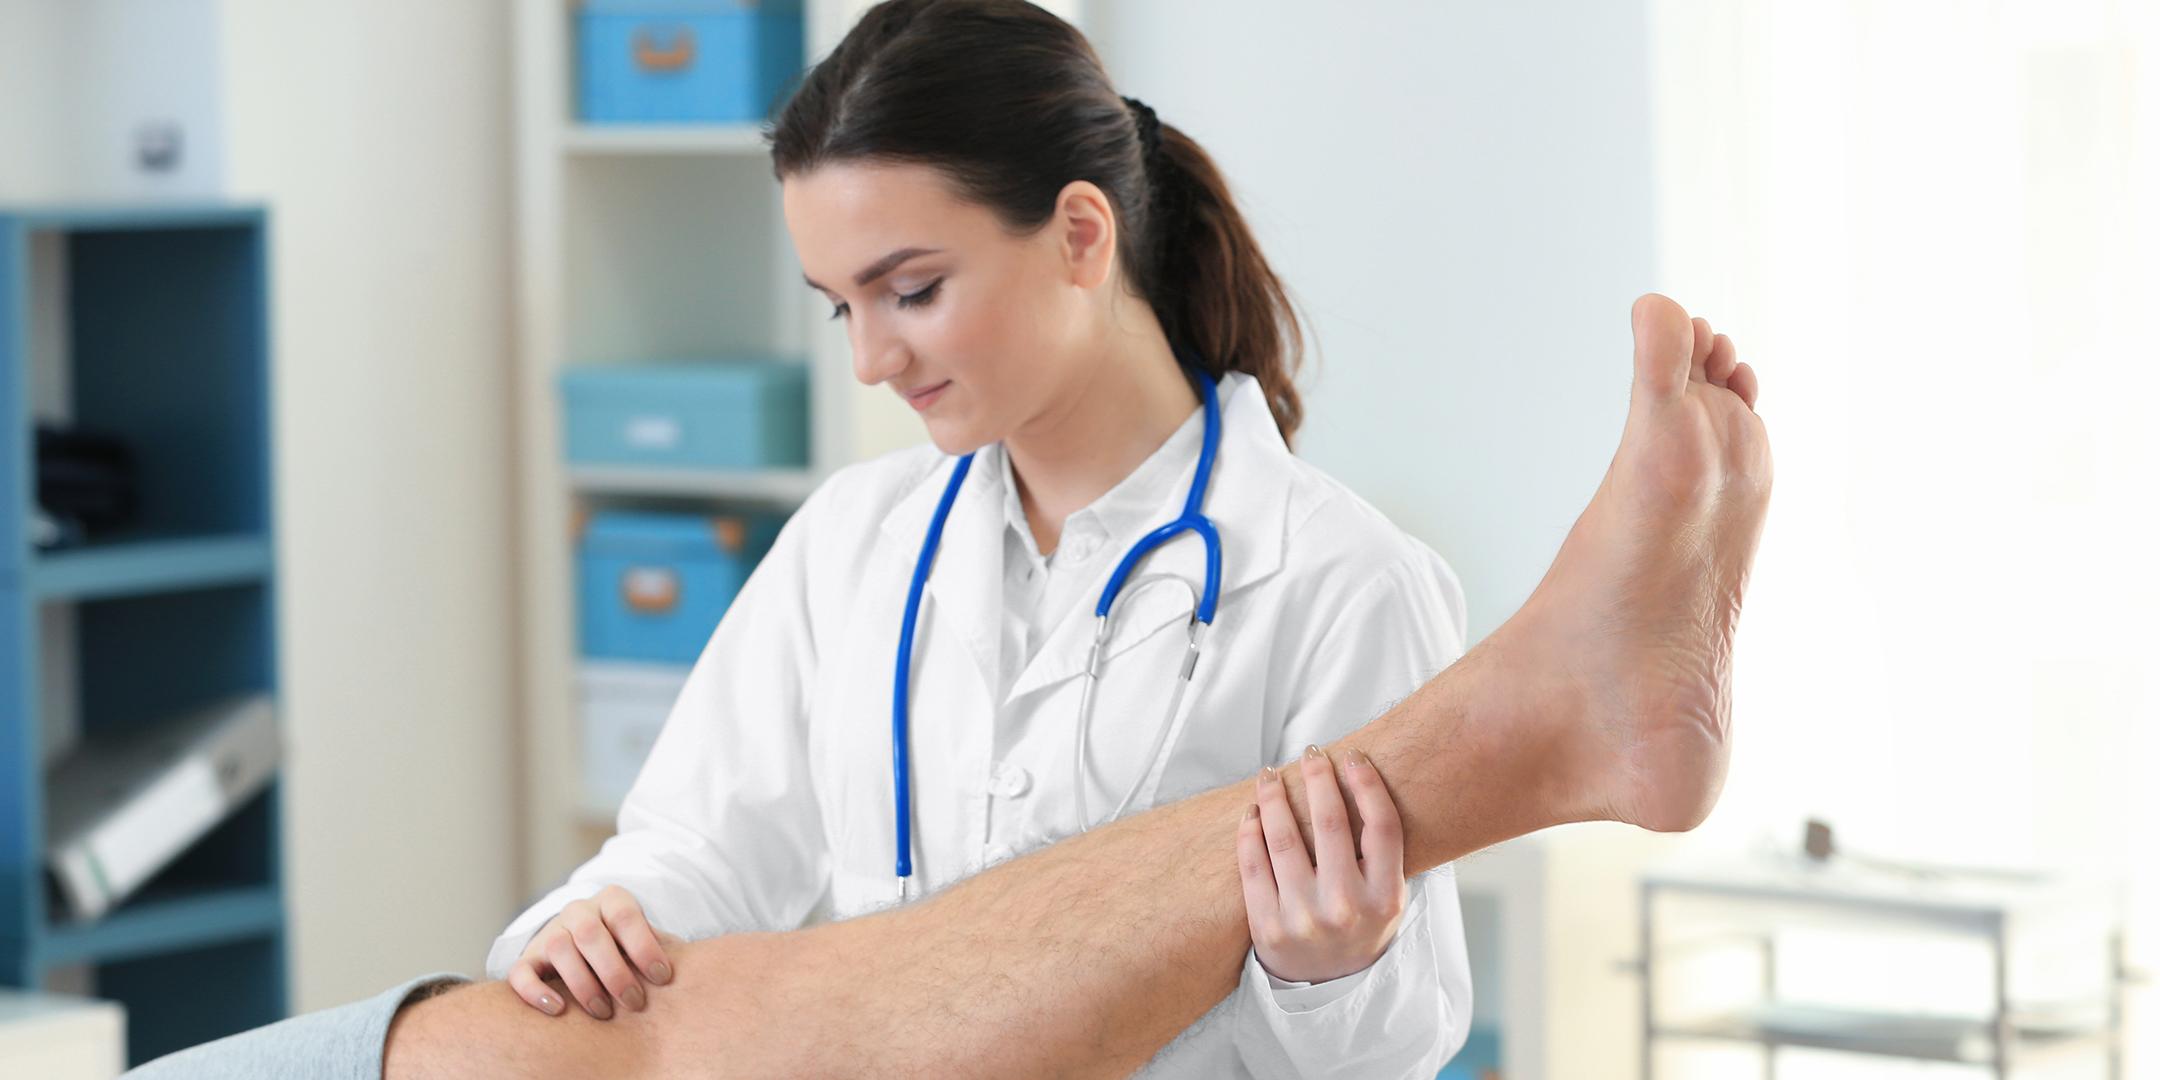 Multidisciplinary Care For Orthopaedic Patients